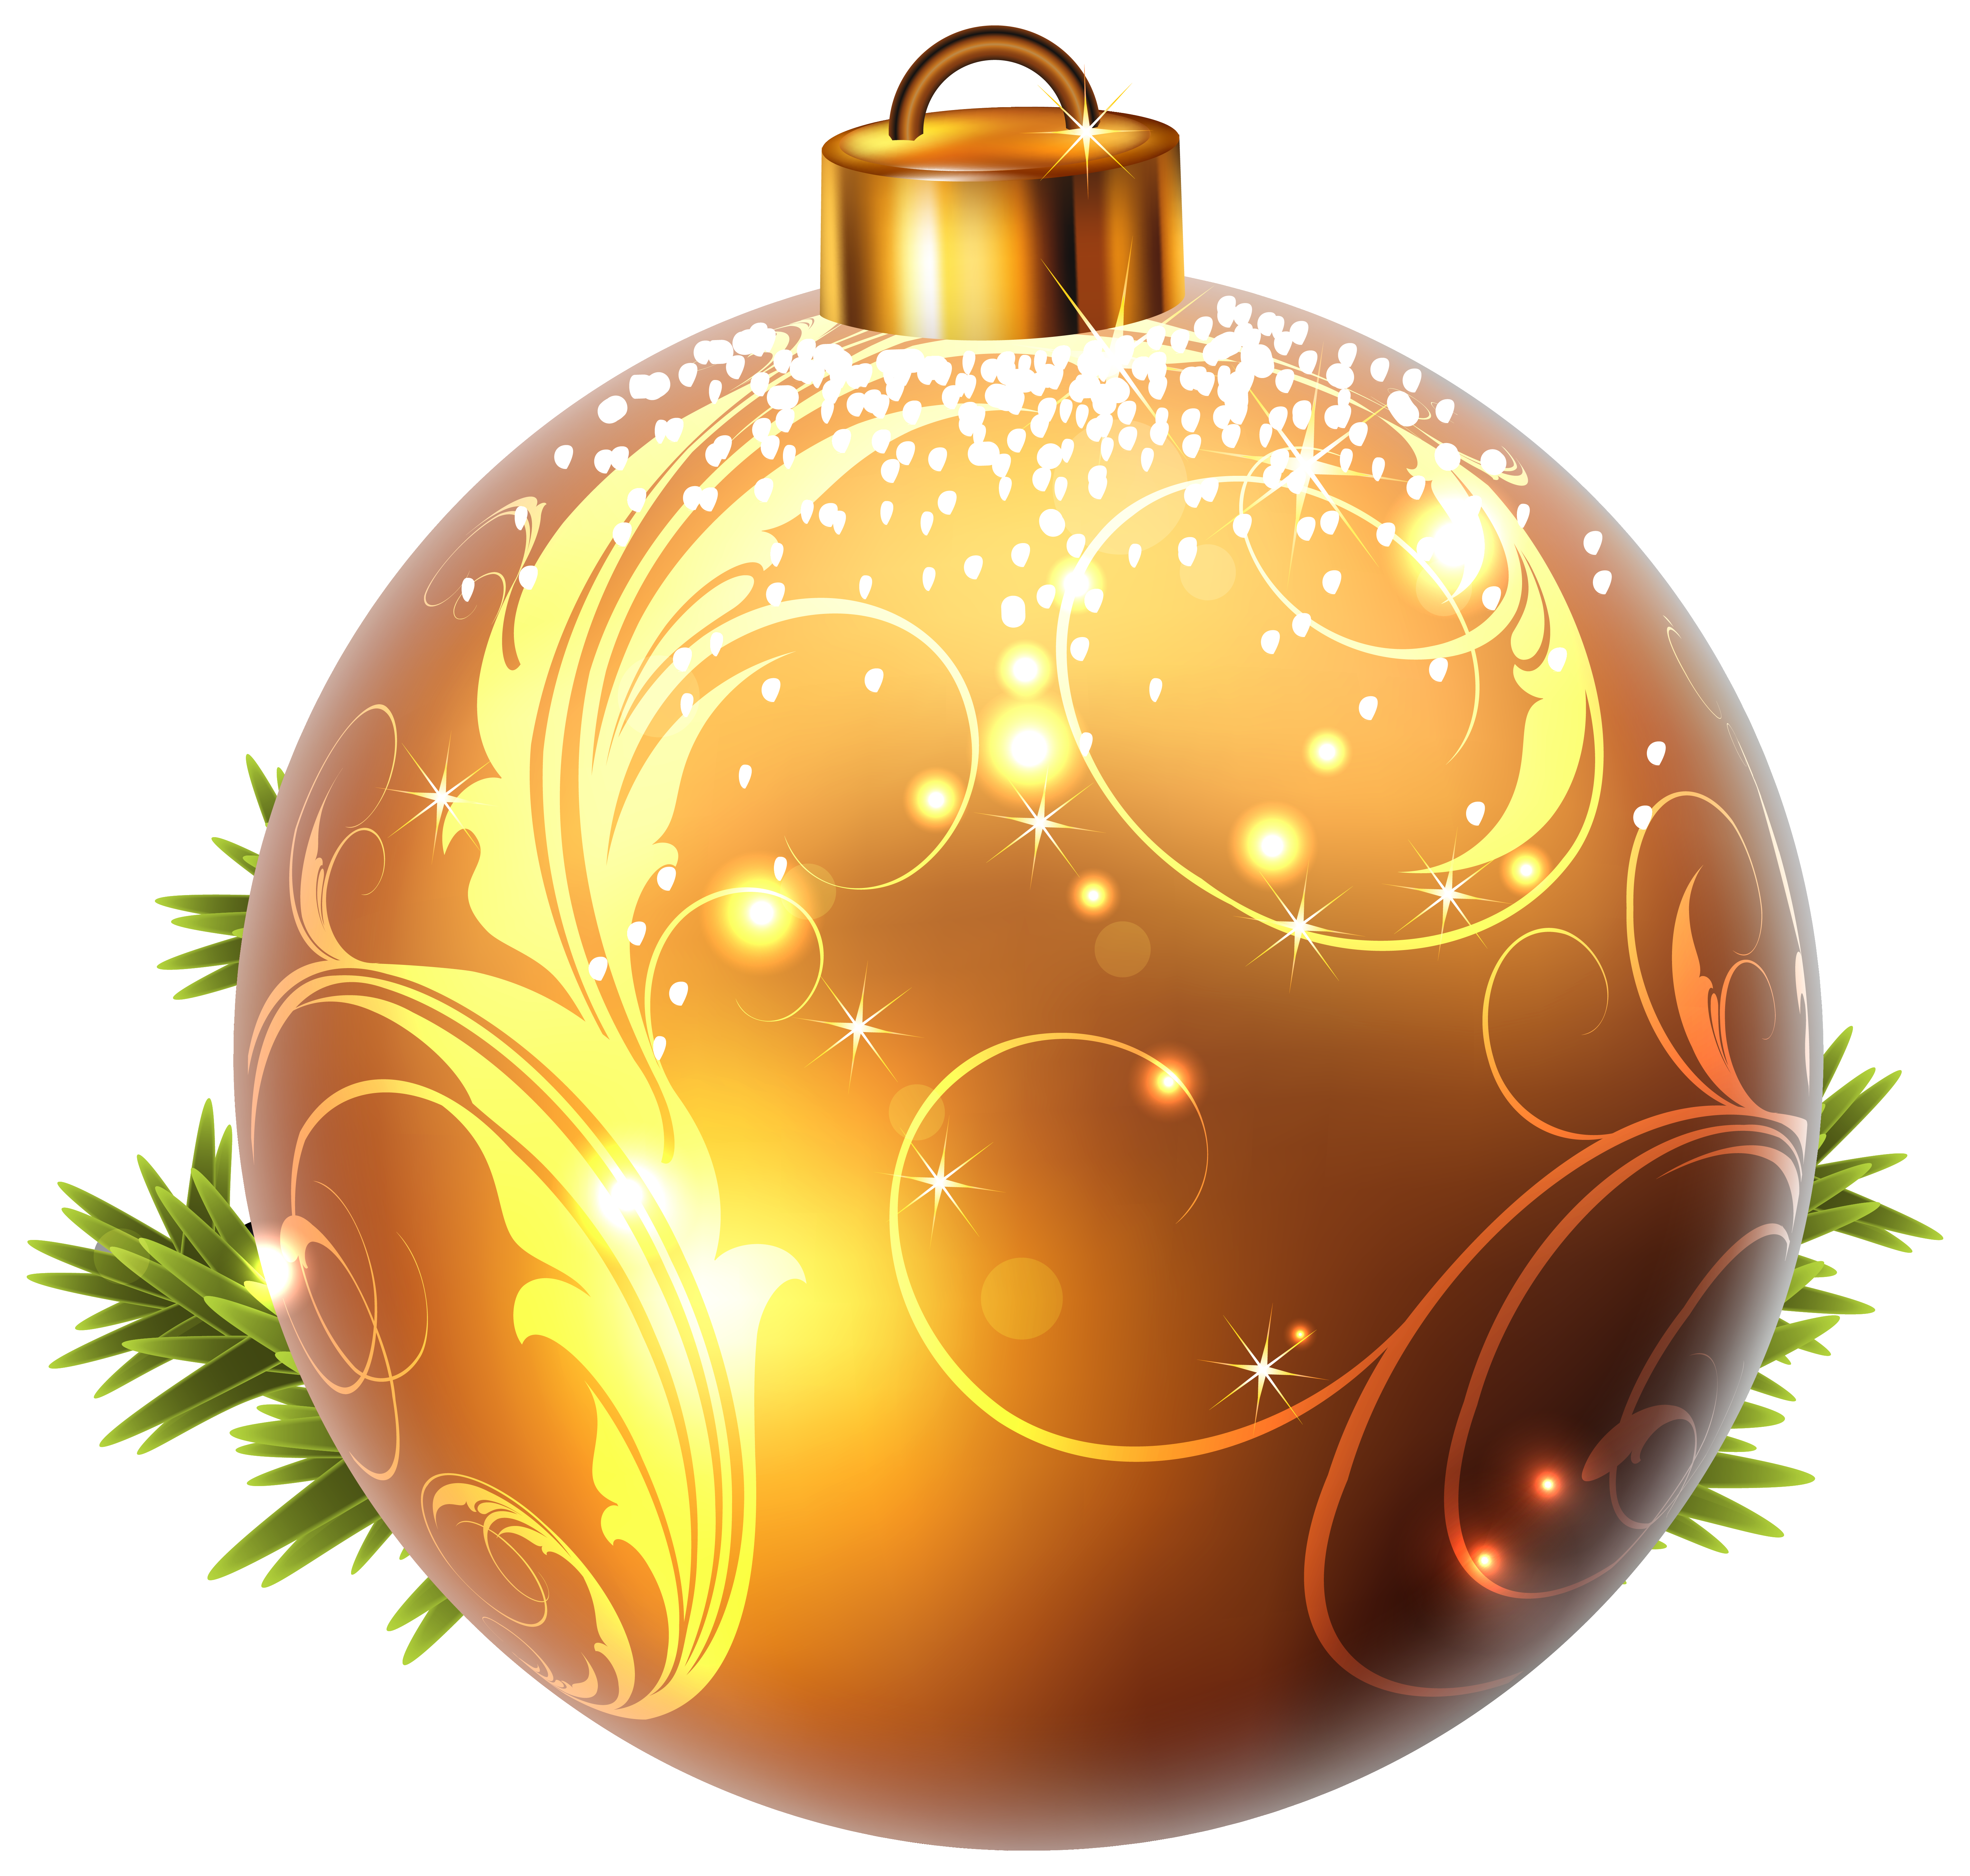 Yellow Christmas Ball PNG Clipart Image Quality Image And Transparent PNG Free Clipart